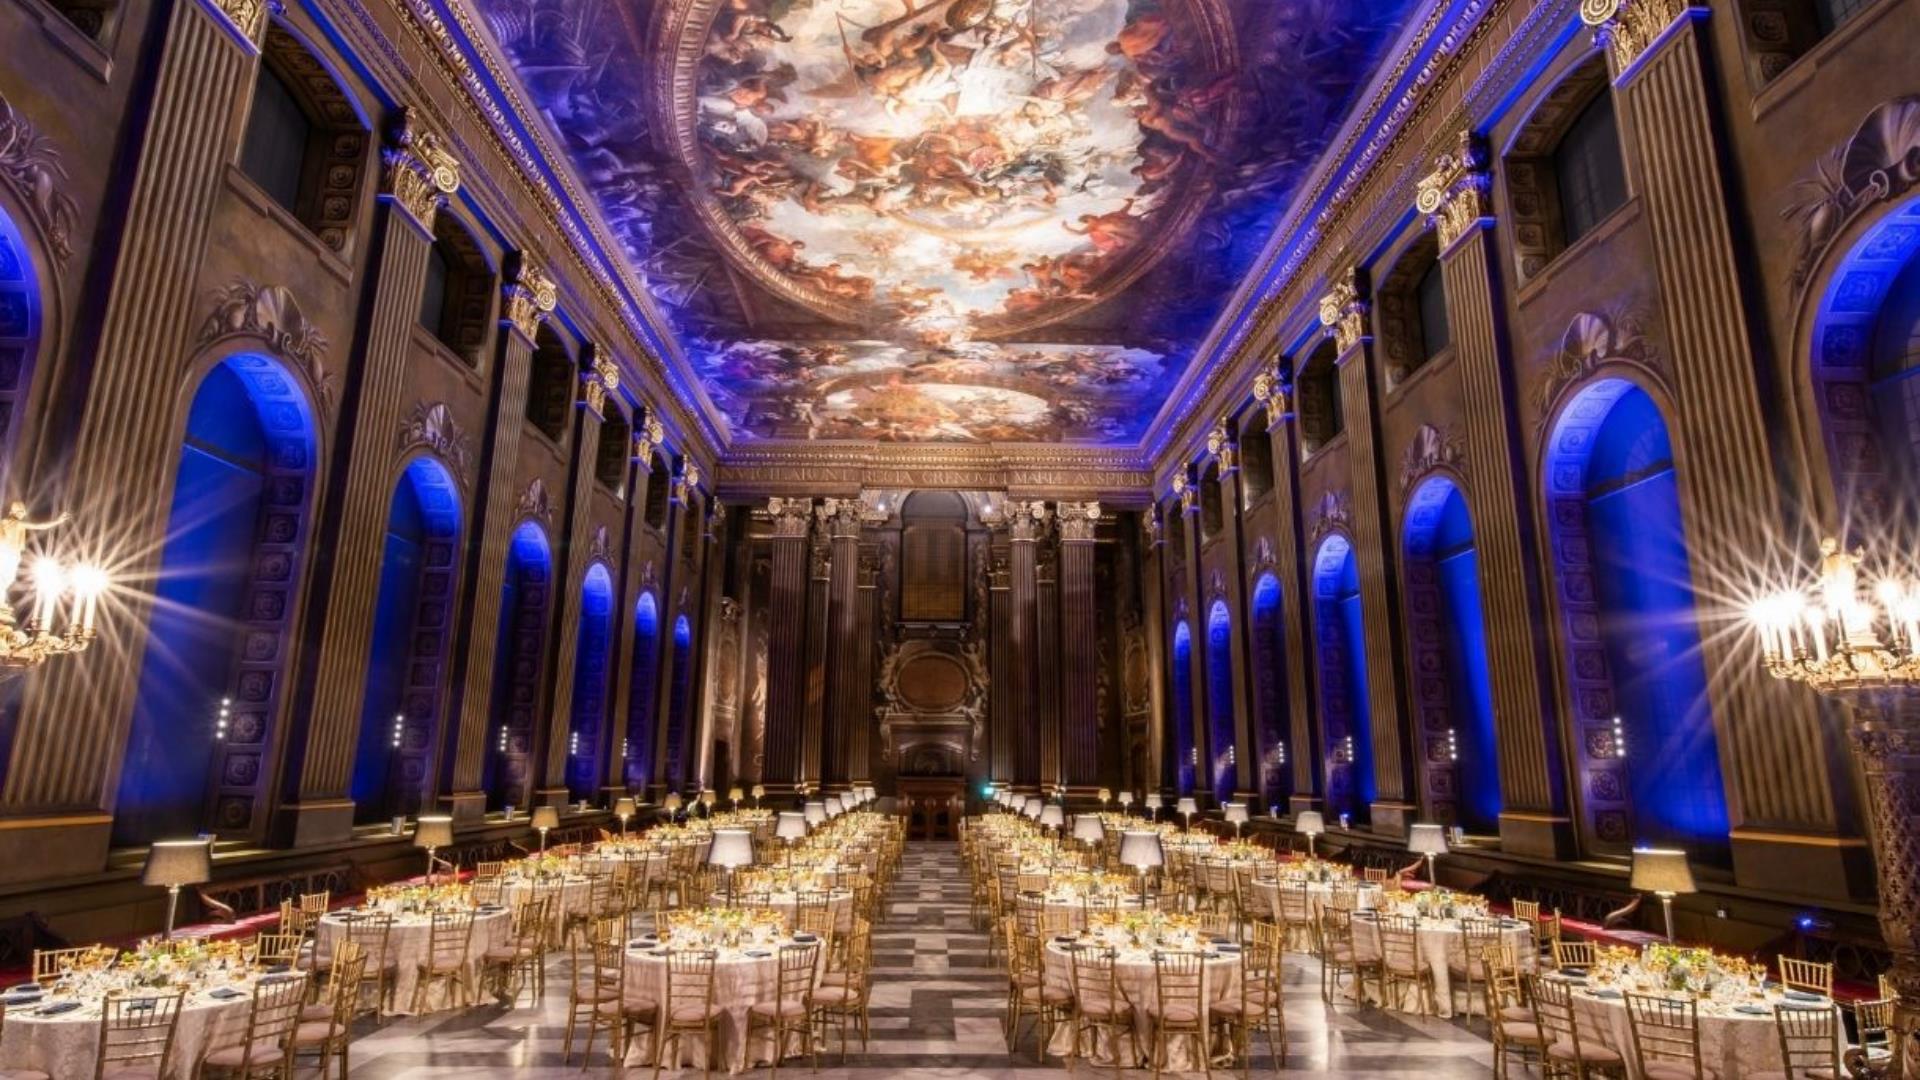 The Painted Hall at the Old Royal Naval College in Greenwich set up for a gala dinner.